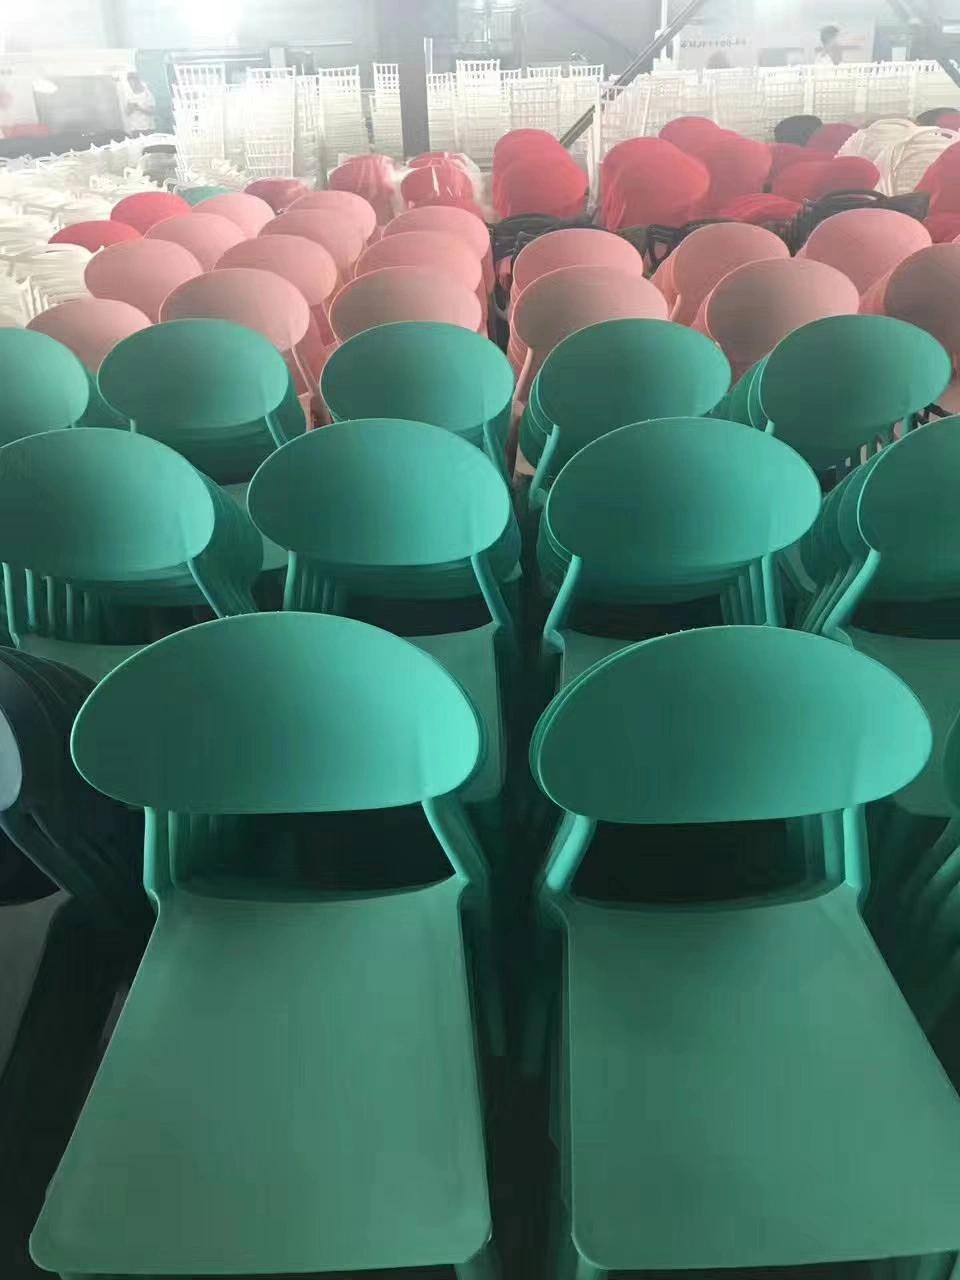 Morden Leisure Design Furniture Colorful Patio/Balcony Full PP Dining Chair Wholesale Price Cheap Stackable Outdoor Plastic Chairs